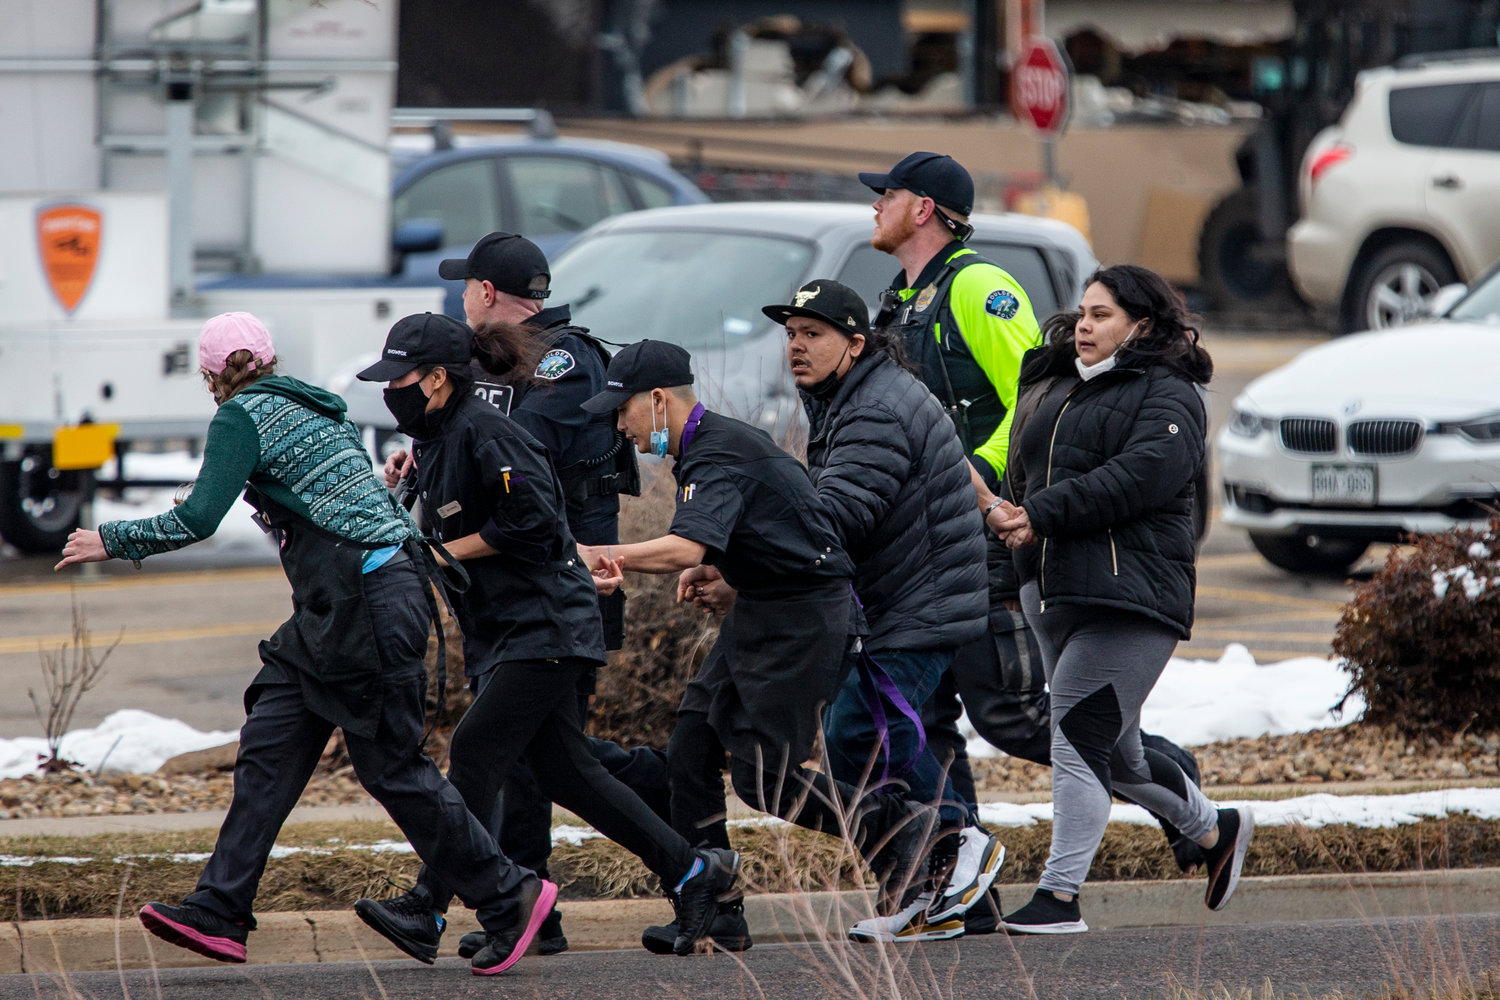 Shoppers are evacuated from a King Soopers grocery store after a gunman opened fire on Monday, March 22, 2021, in Boulder, Colorado. (Chet Strange/Getty Images/TNS)